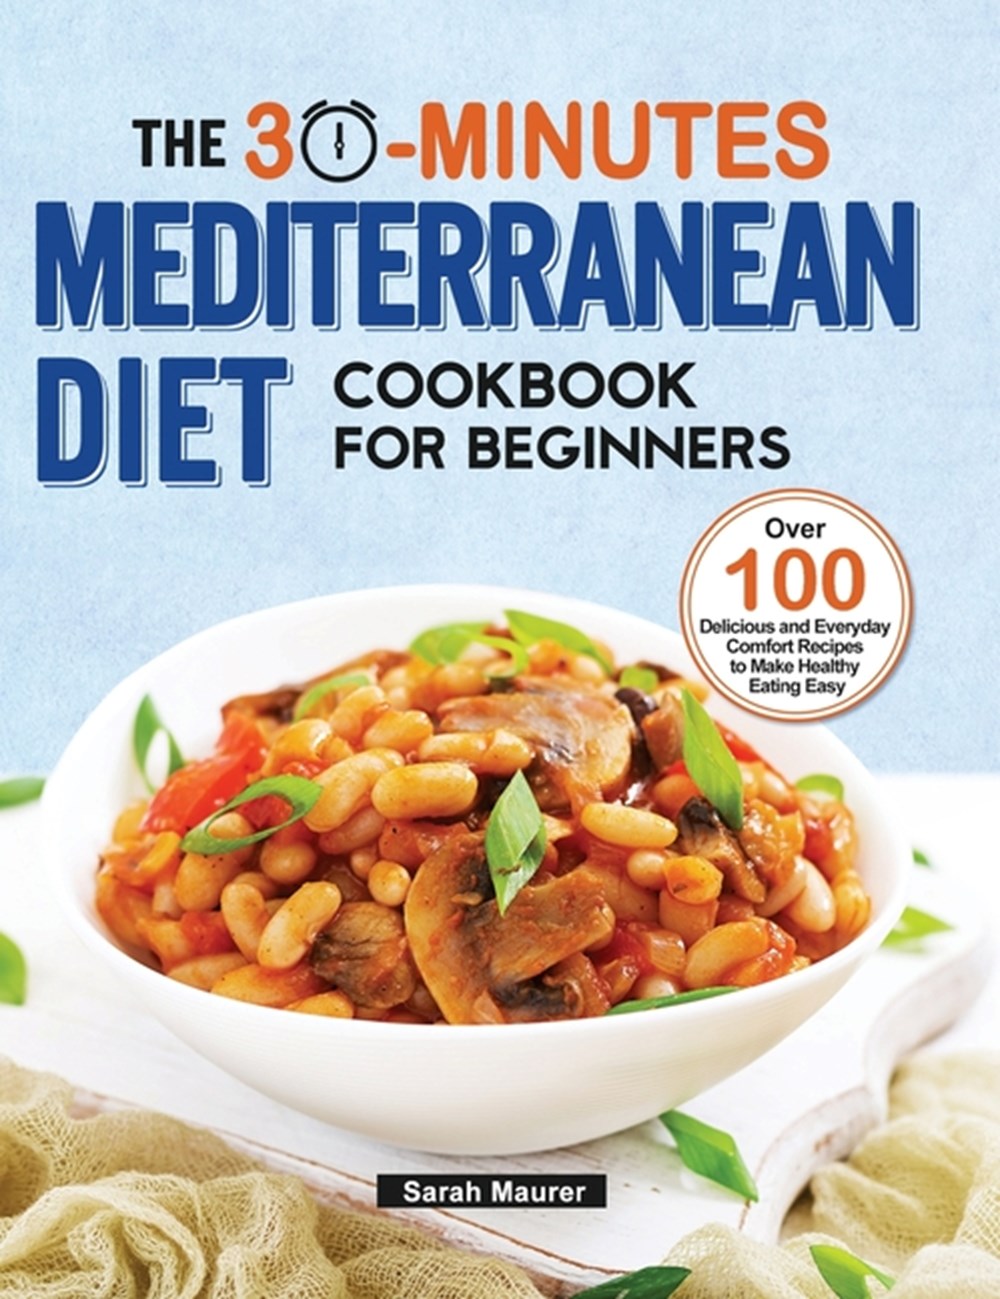 30-Minutes Mediterranean Diet Cookbook for Beginners Over 100 Delicious and Everyday Comfort Recipes